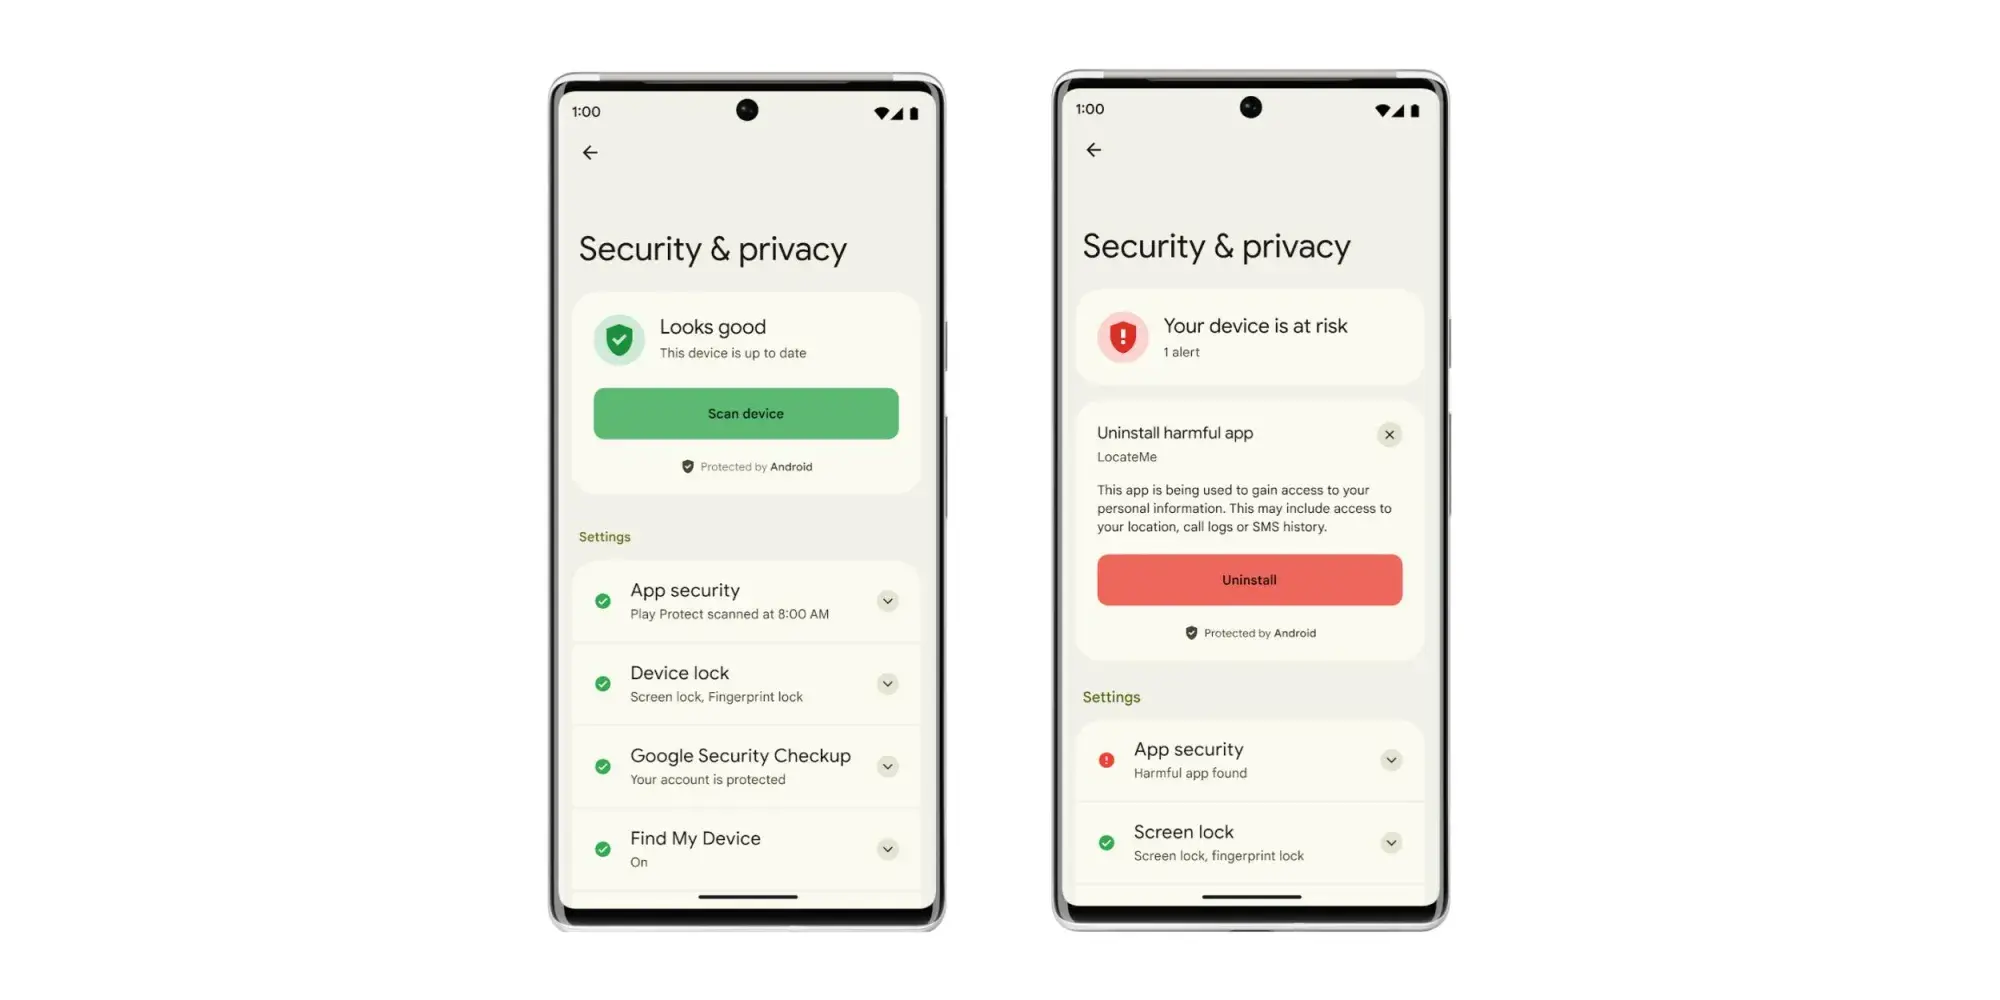 Google introduces new "Protected by Android" branding for security and privacy on Android